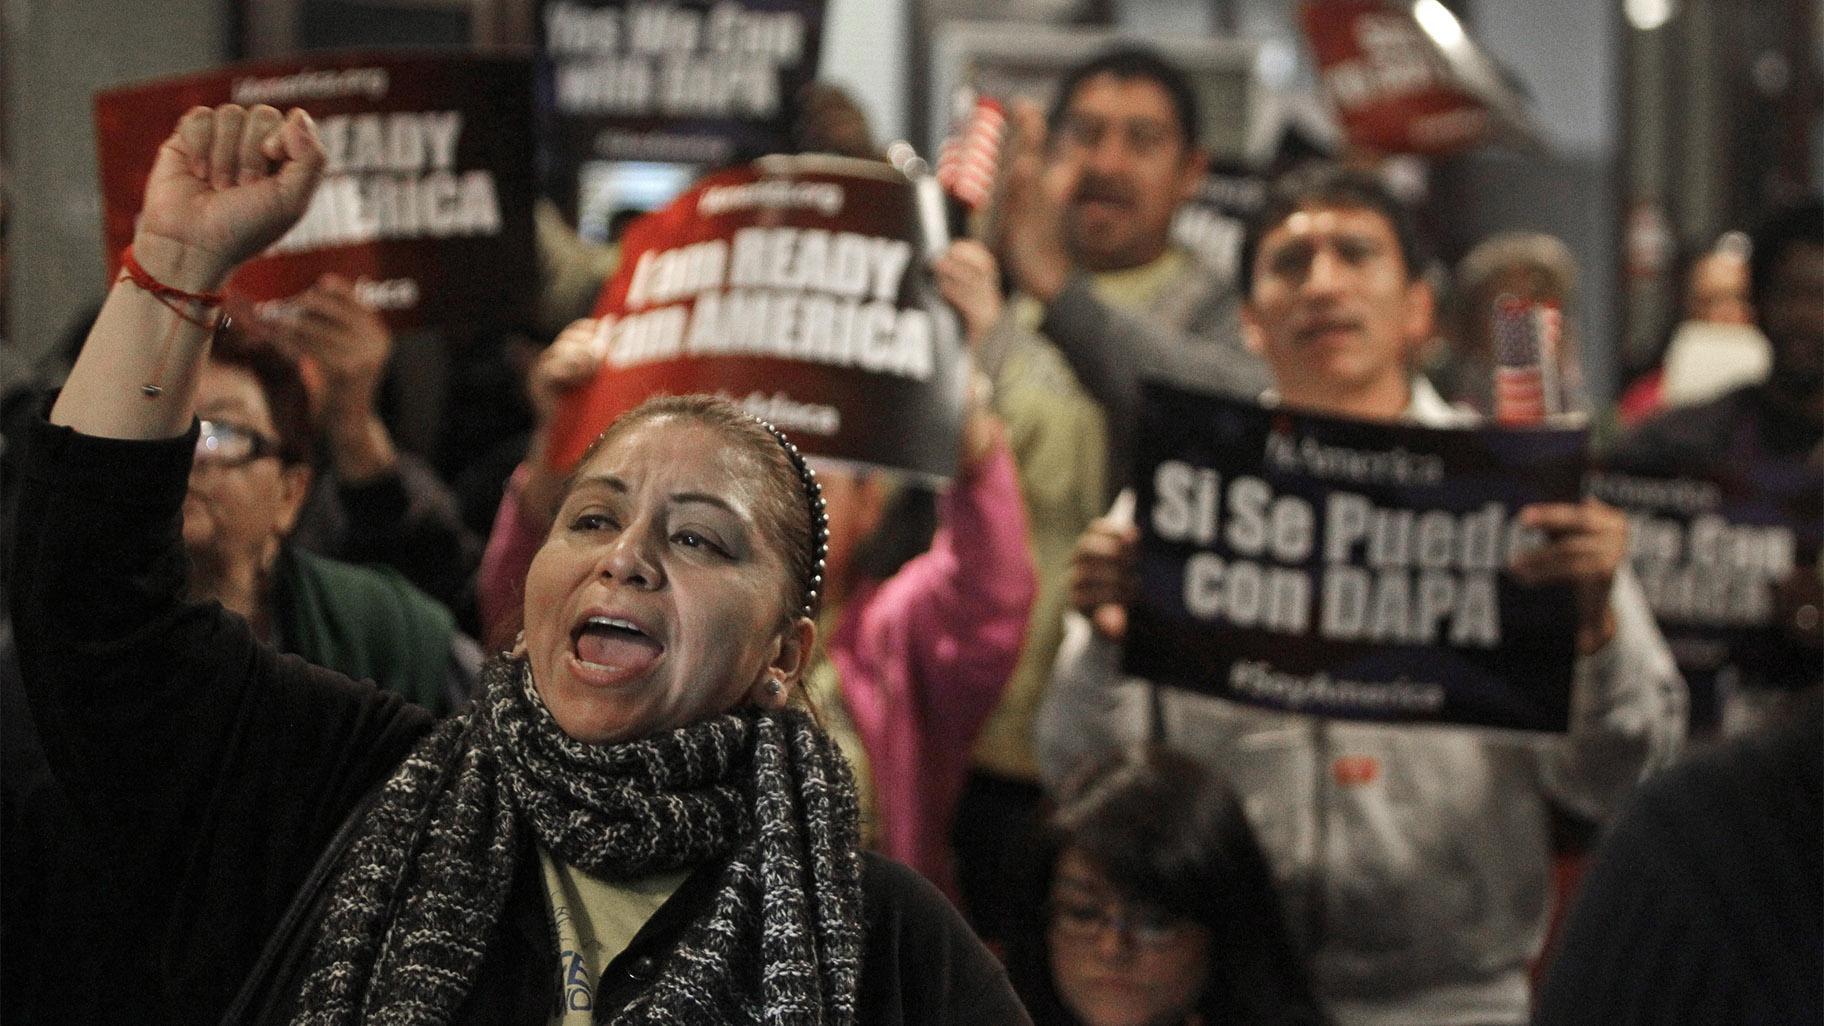 FILE - In this Tuesday, Feb. 17, 2015 file photo, Mercedes Herrera and others chant during an event on DACA and DAPA Immigration Relief at the Houston International Trade Center in Houston. (Melissa Phillip / Houston Chronicle via AP, File)